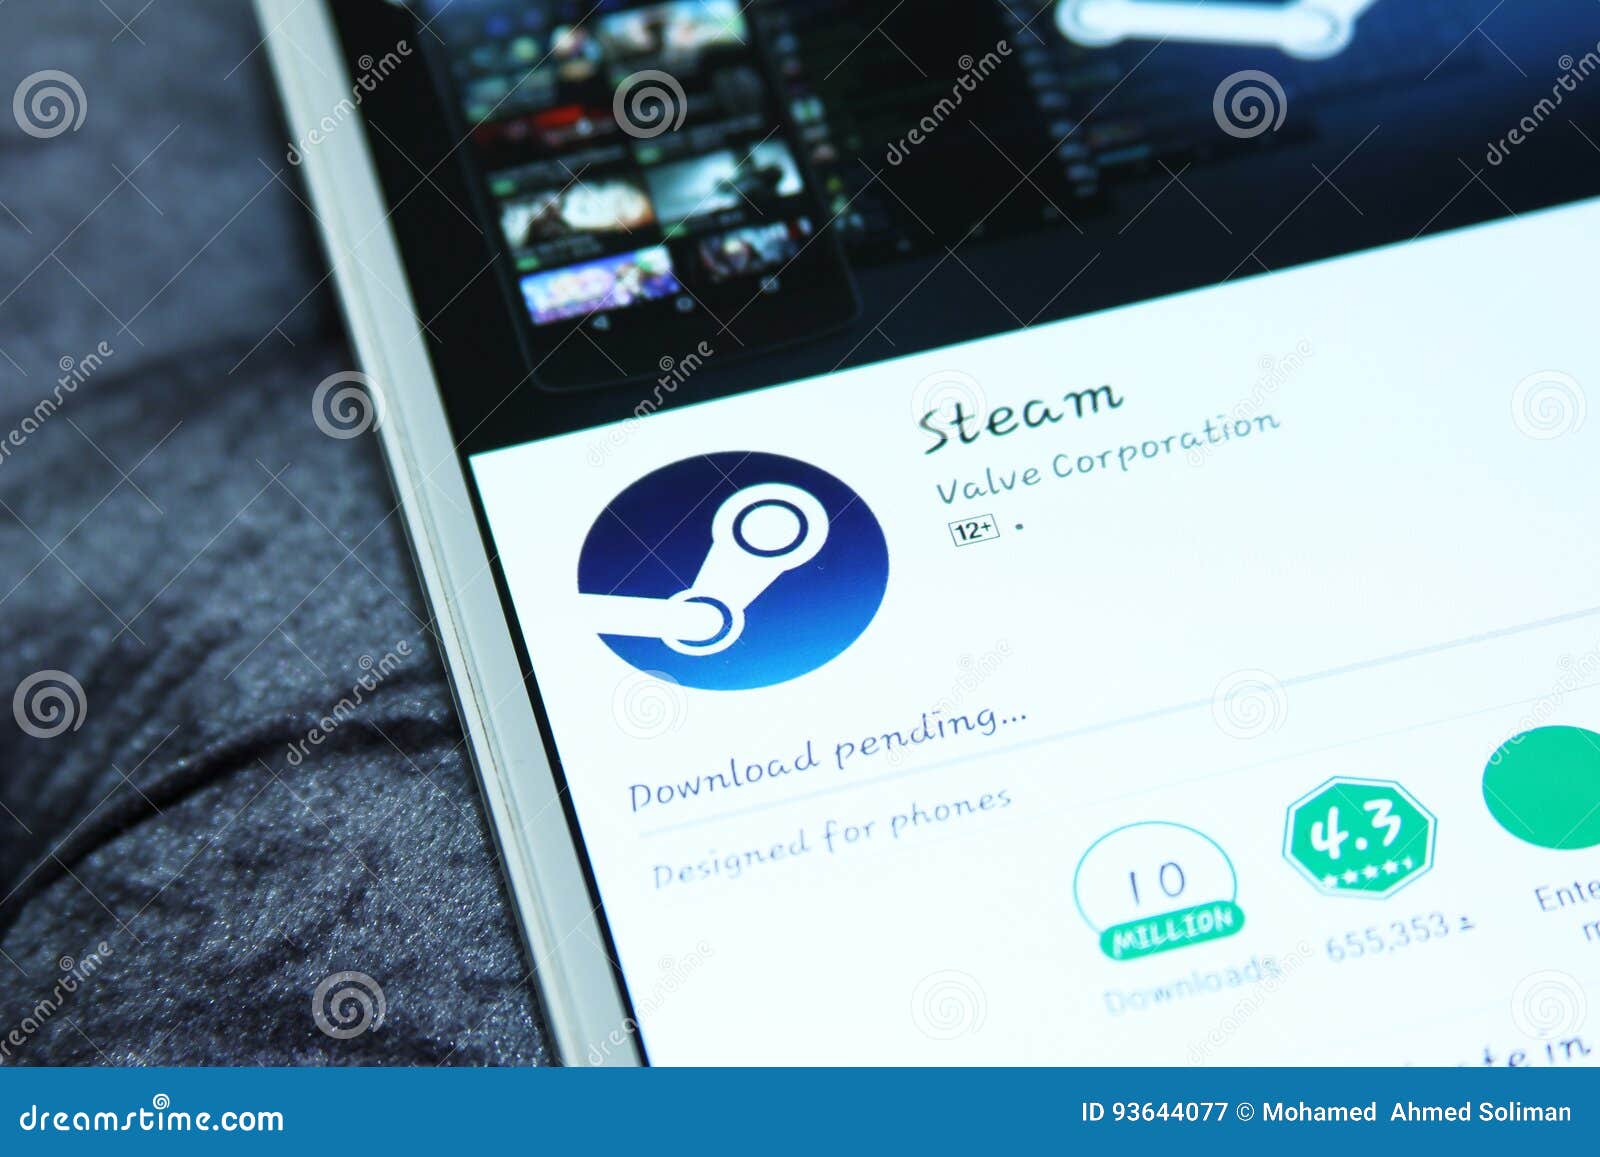 Steam mobile application фото 85